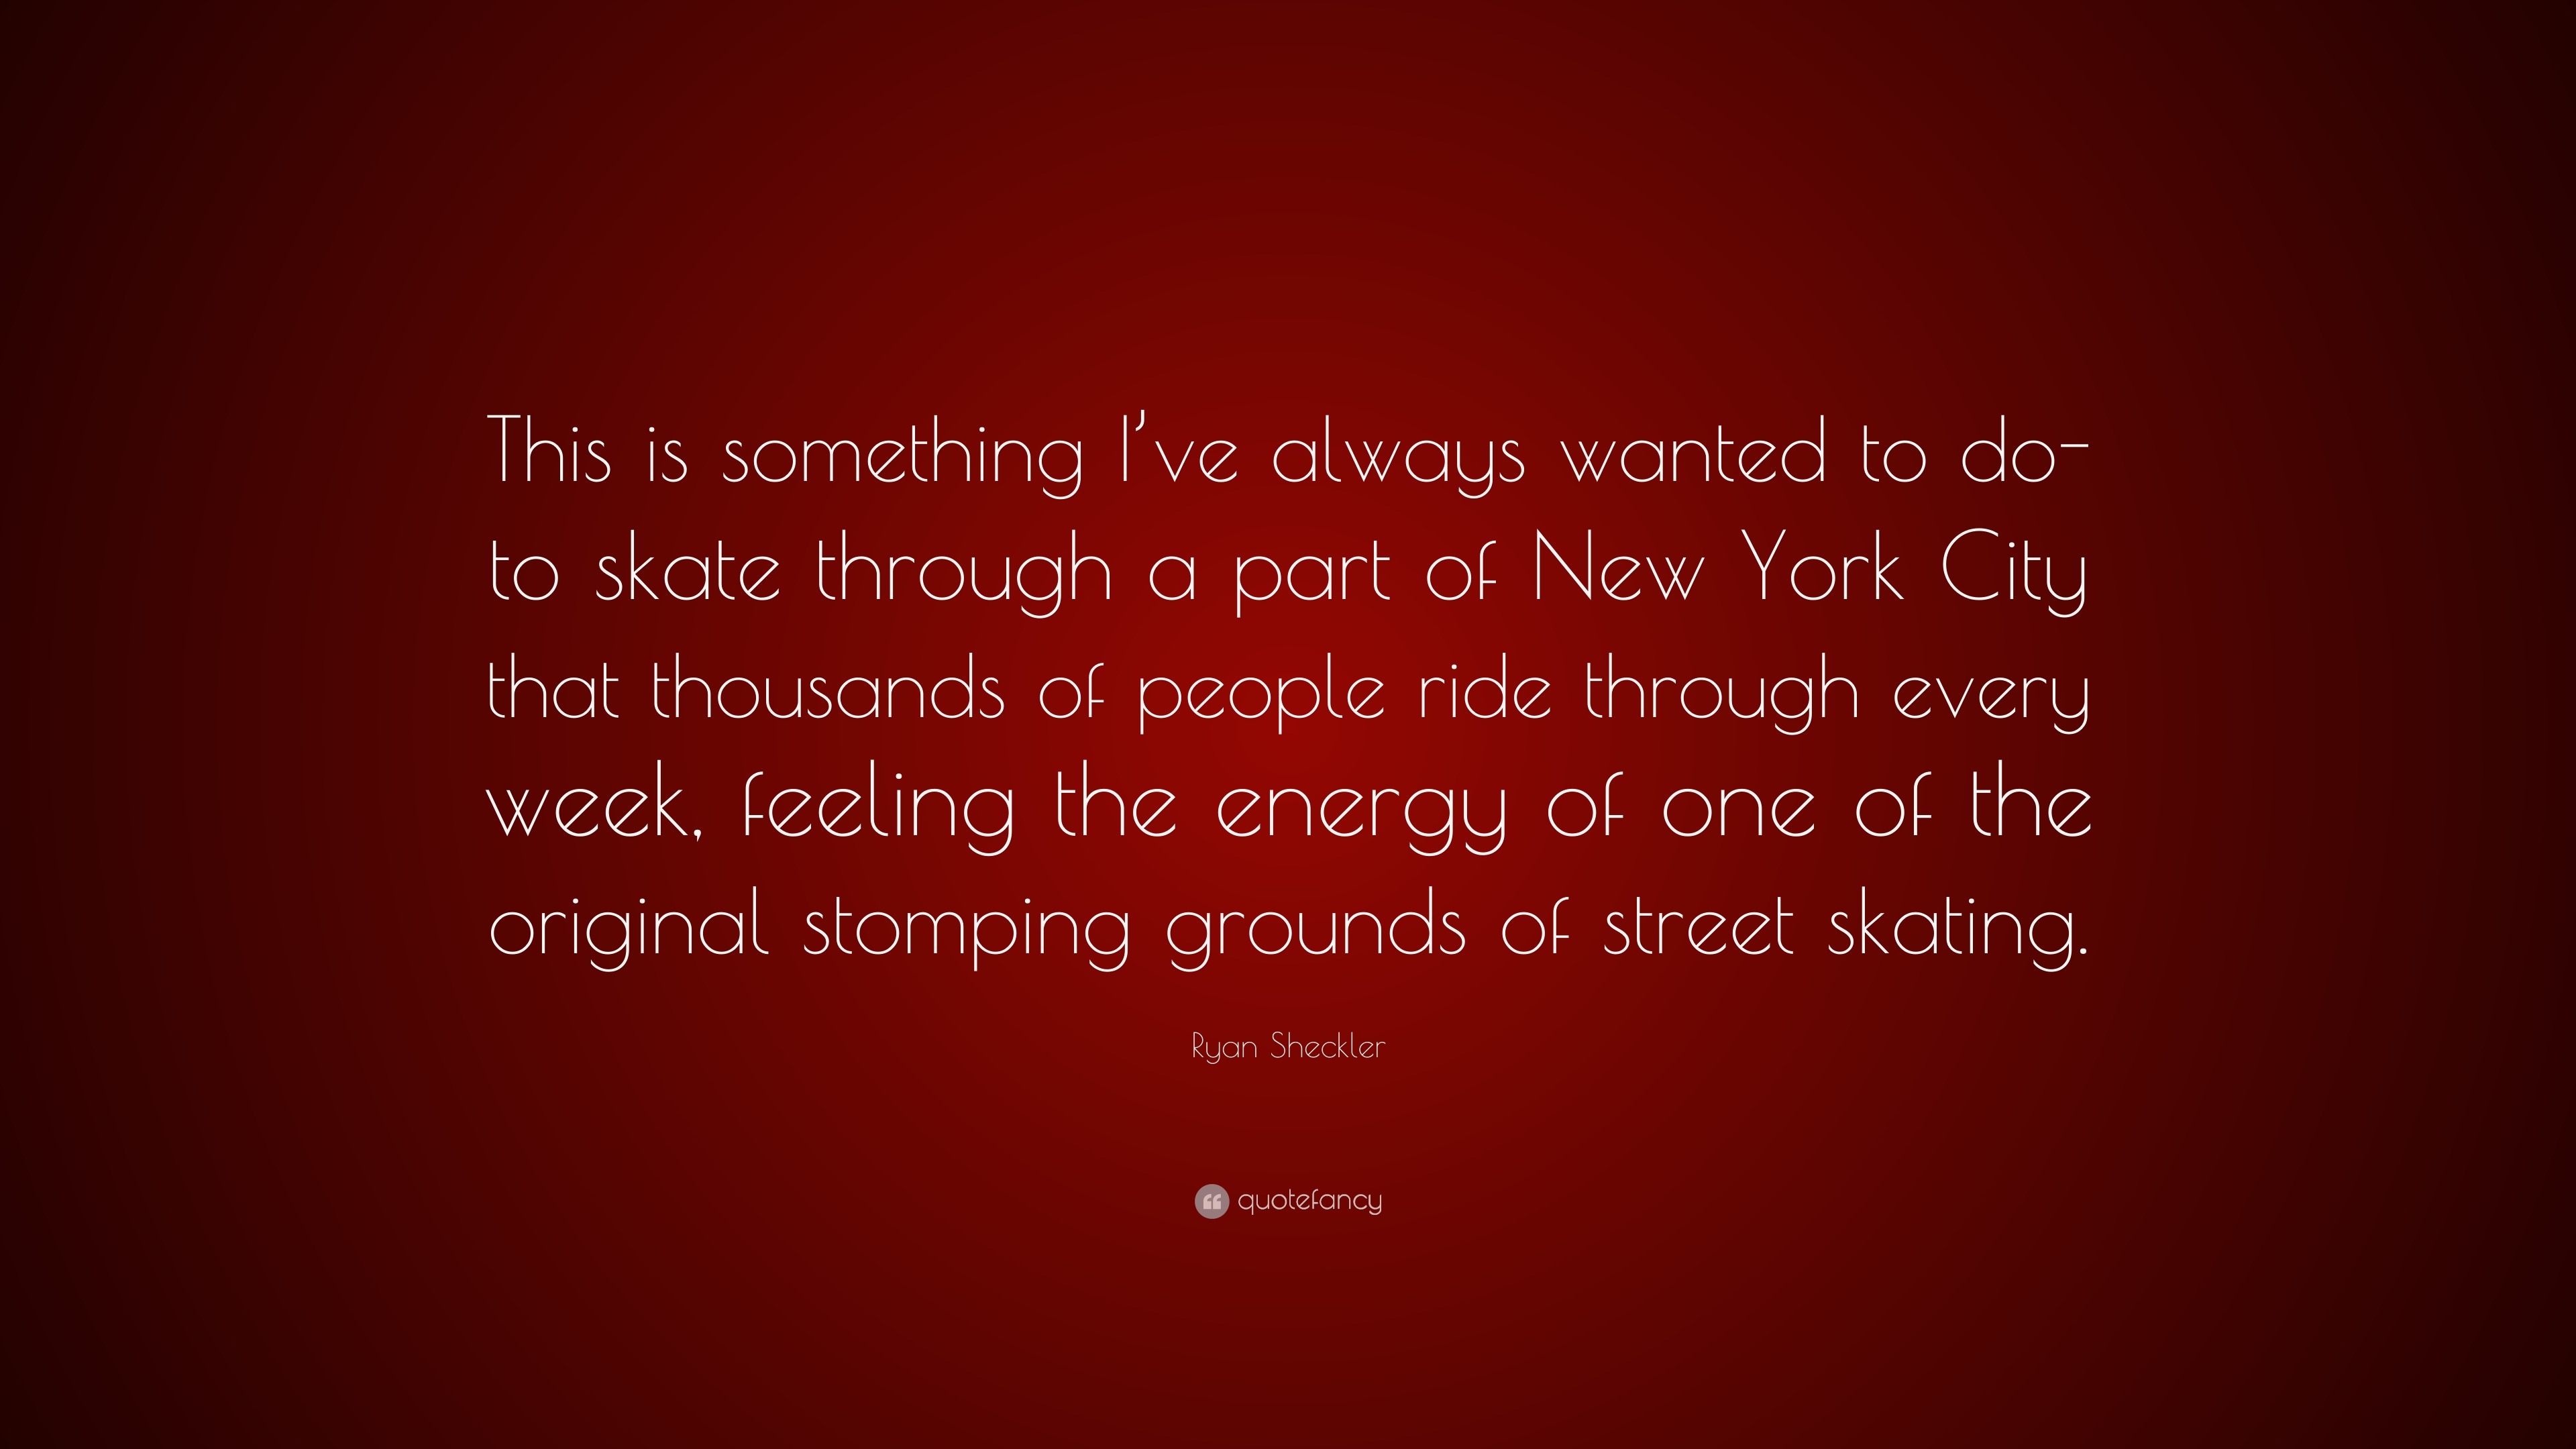 Ryan Sheckler Quote: “This is something I’ve always wanted to do- to ...